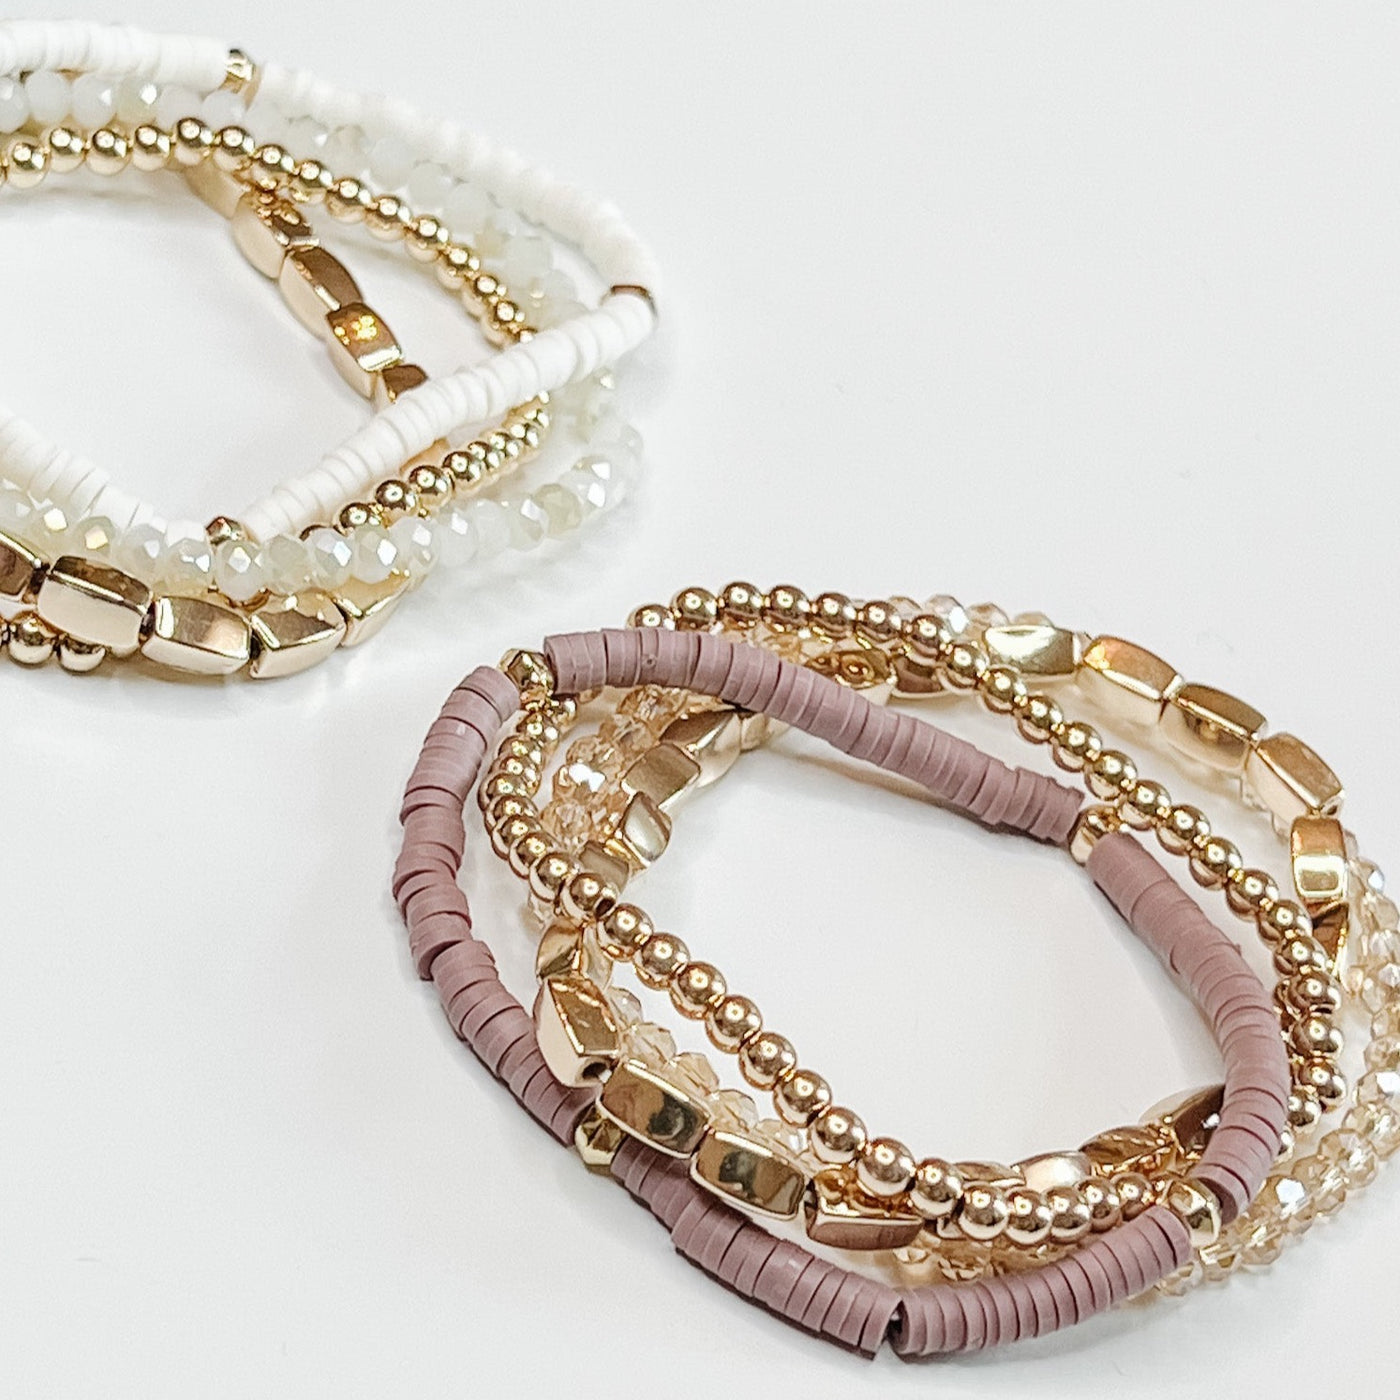 stretchy Hartford Bracelet is a four strand set with gold accents